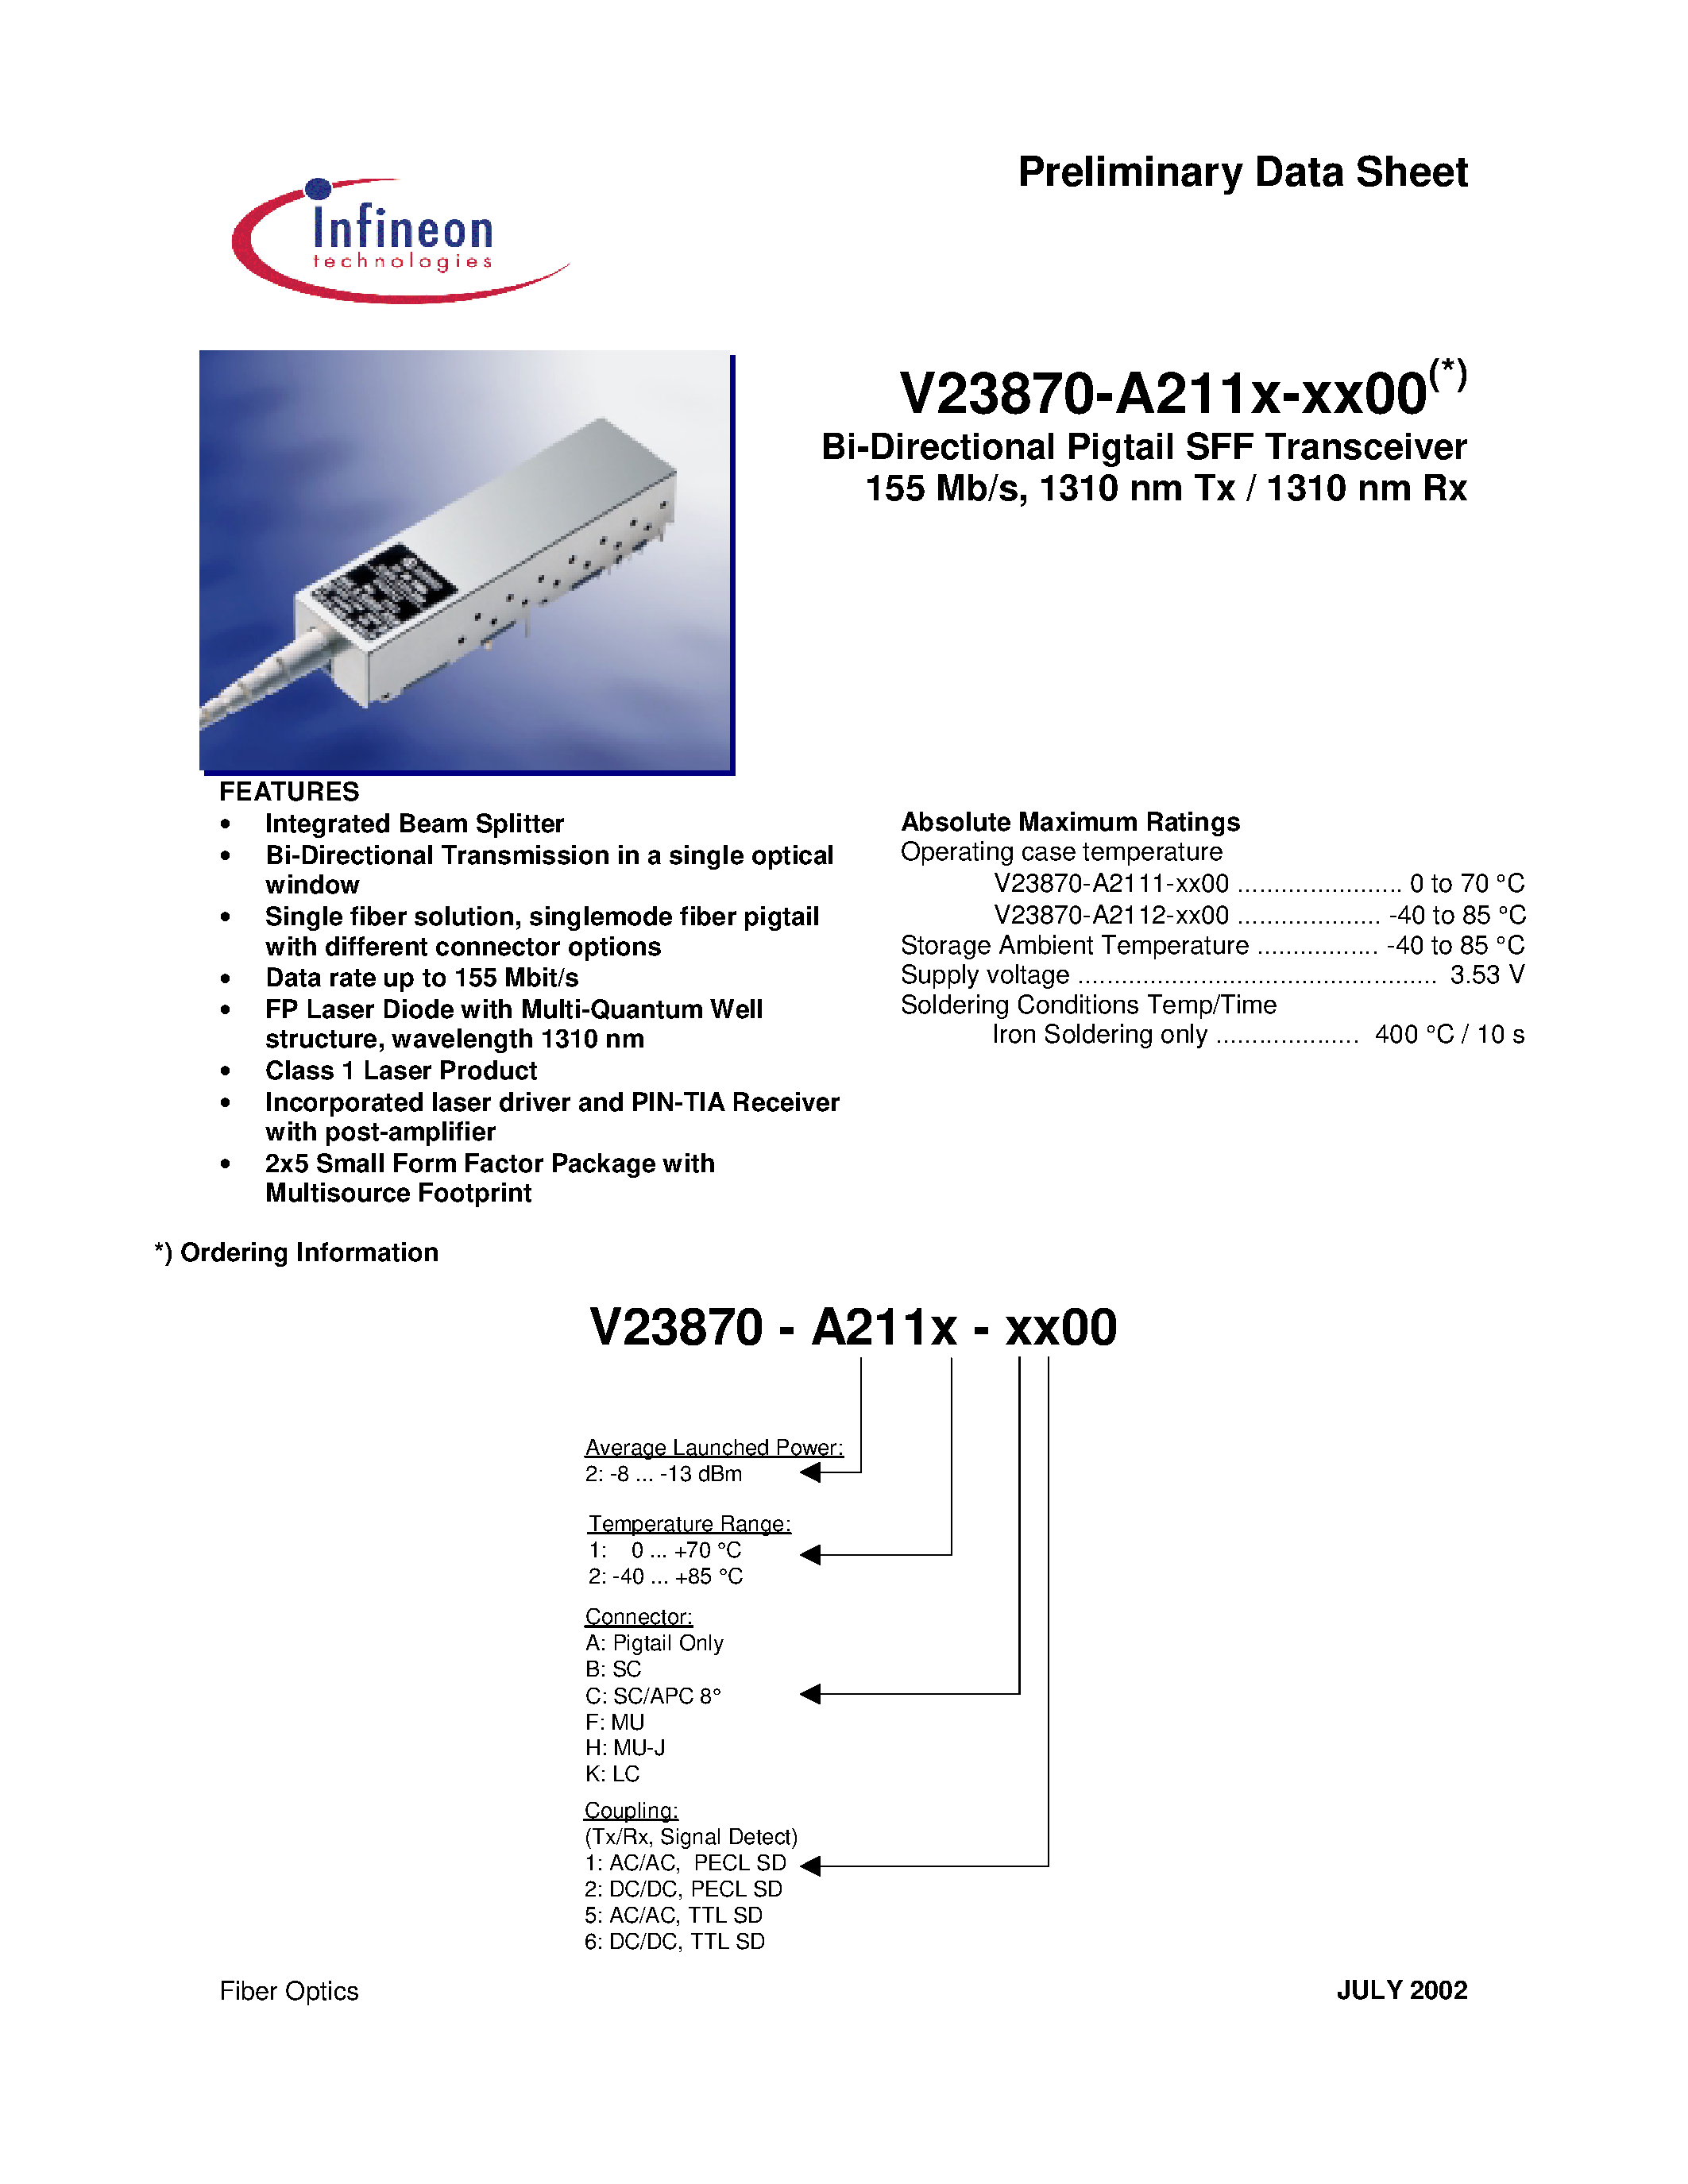 Datasheet V23870-A2111-K600 - Bi-Directional Pigtail SFF Transceiver 155 Mb/s/ 1310 nm Tx / 1310 nm Rx page 1